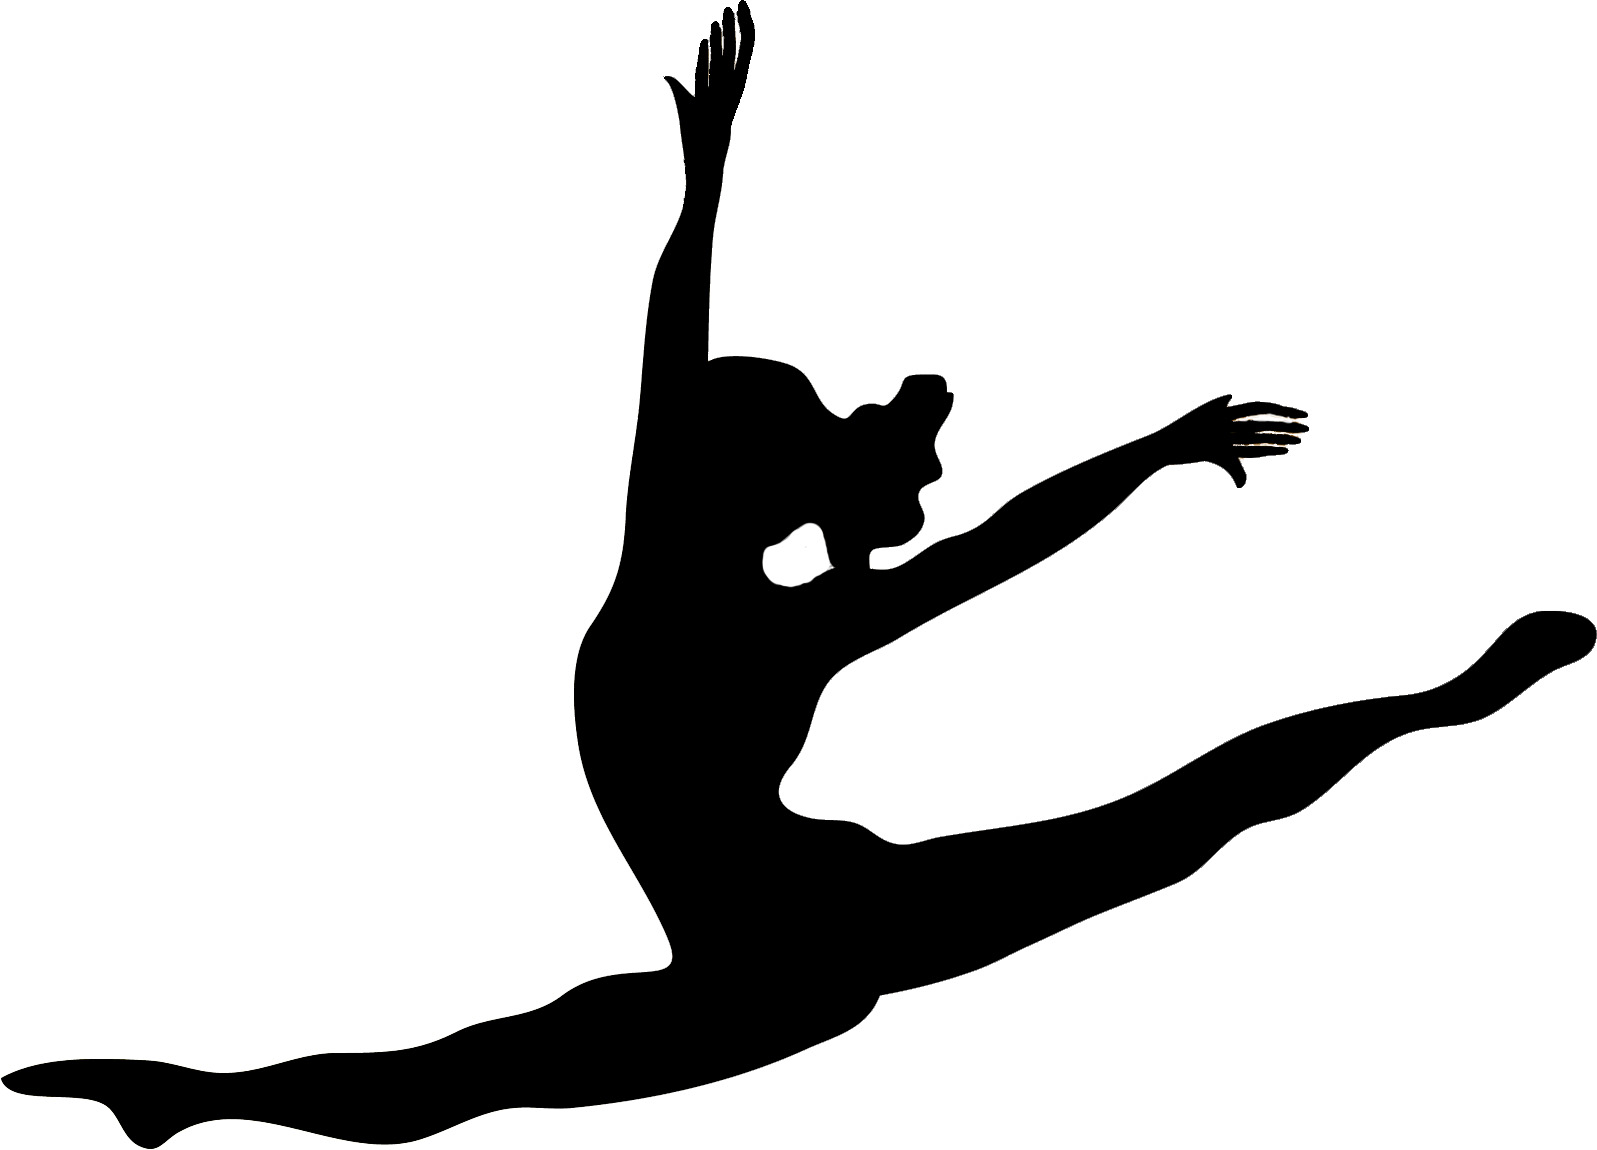 Dancer Jumping Silhouette | Clipart Panda - Free Clipart Images